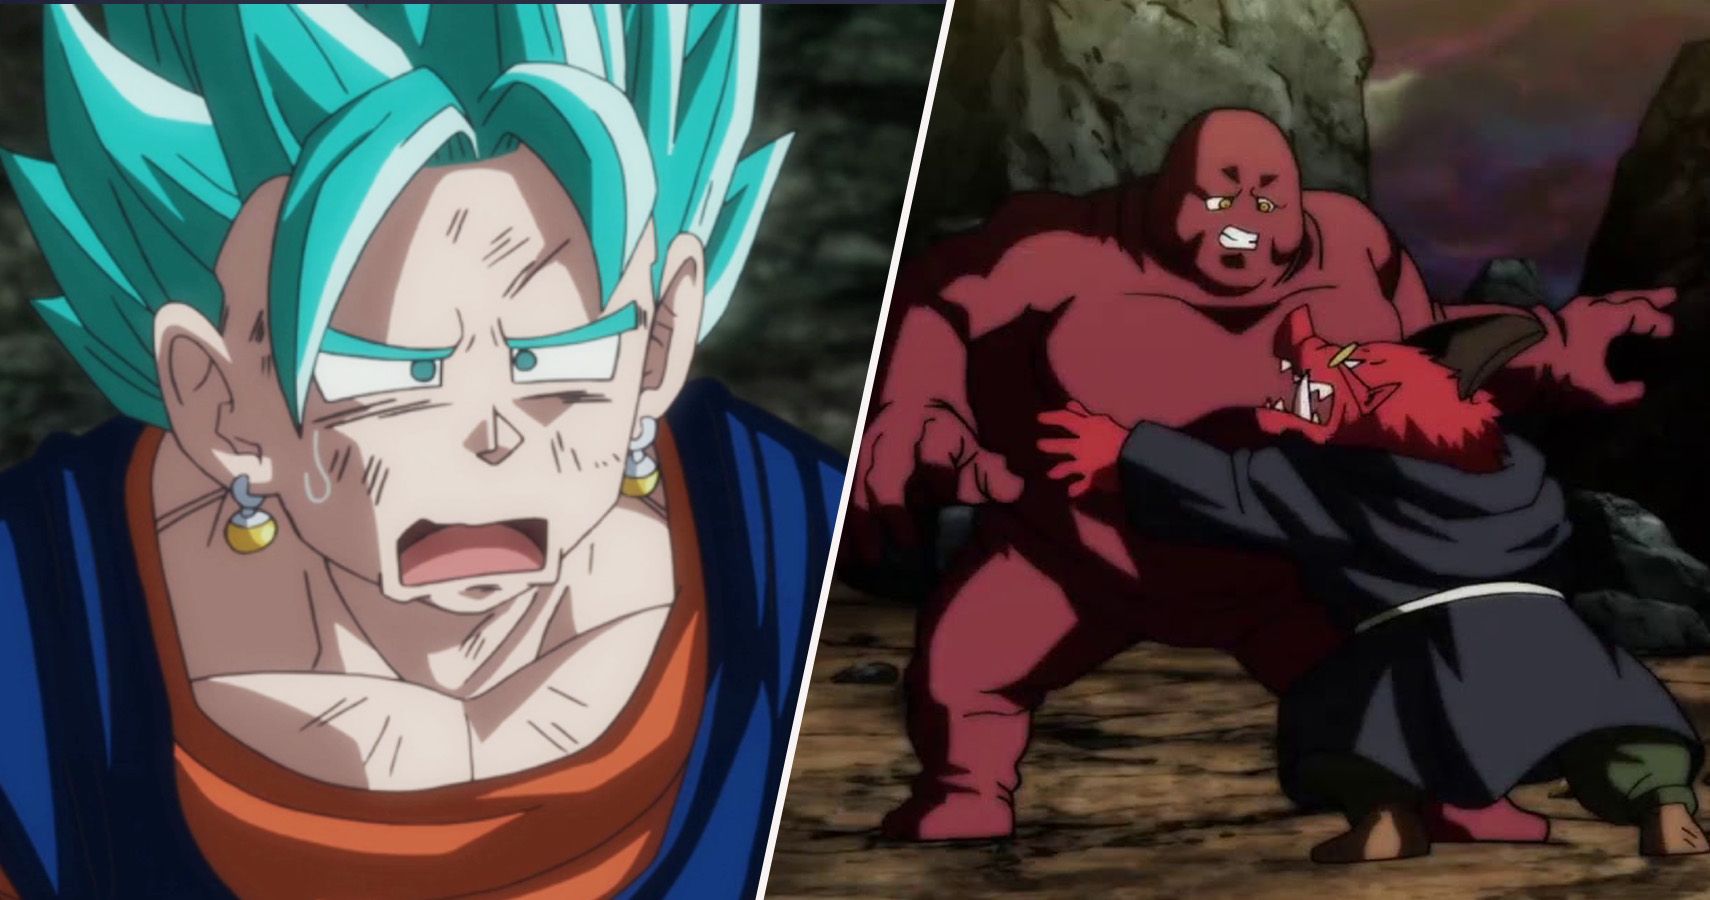 Dragon Ball Super 2' Plot Could Focus On Wiping Out All The Gods